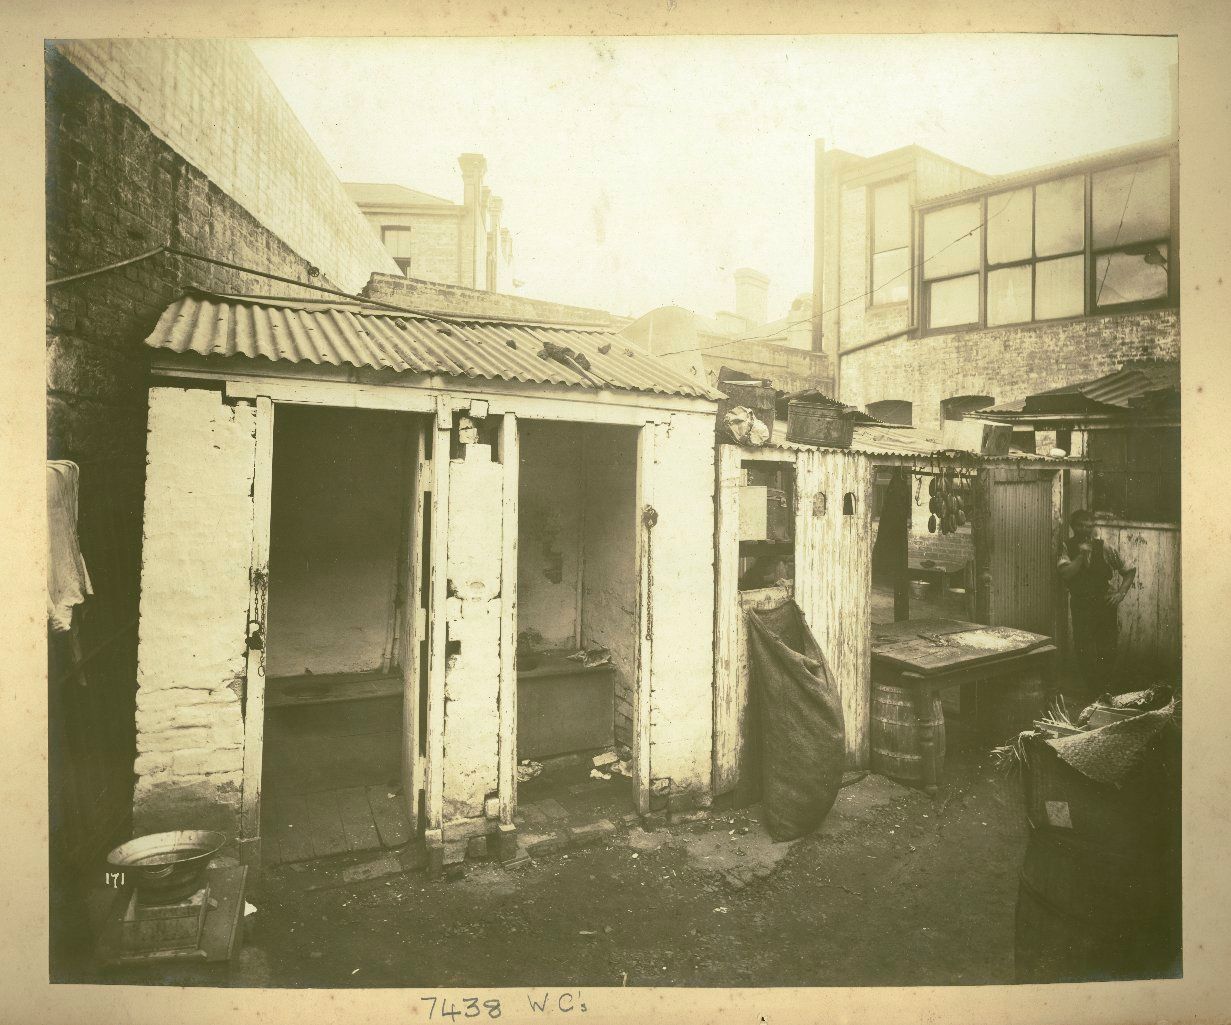 A rundown shed of two toilet blocks stand next to the rear open workspace of a butcher